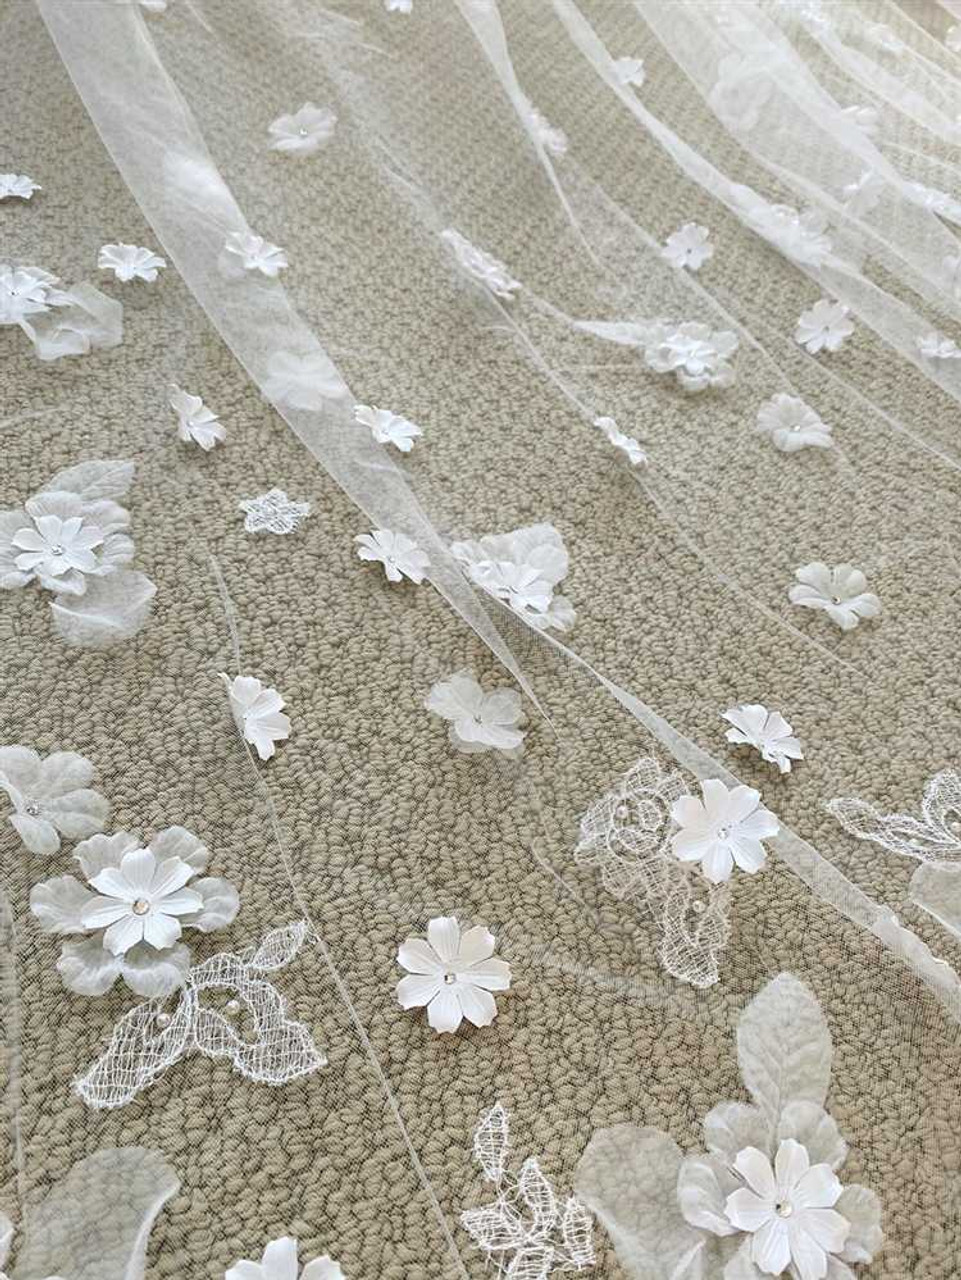 https://cdn11.bigcommerce.com/s-zb3qt33o/images/stencil/1280x1280/products/19153/65090/Cathedral-Wedding-Veil-with-Scattered-Flowers-and-Crystals_48513__34783.1698106936.jpg?c=2